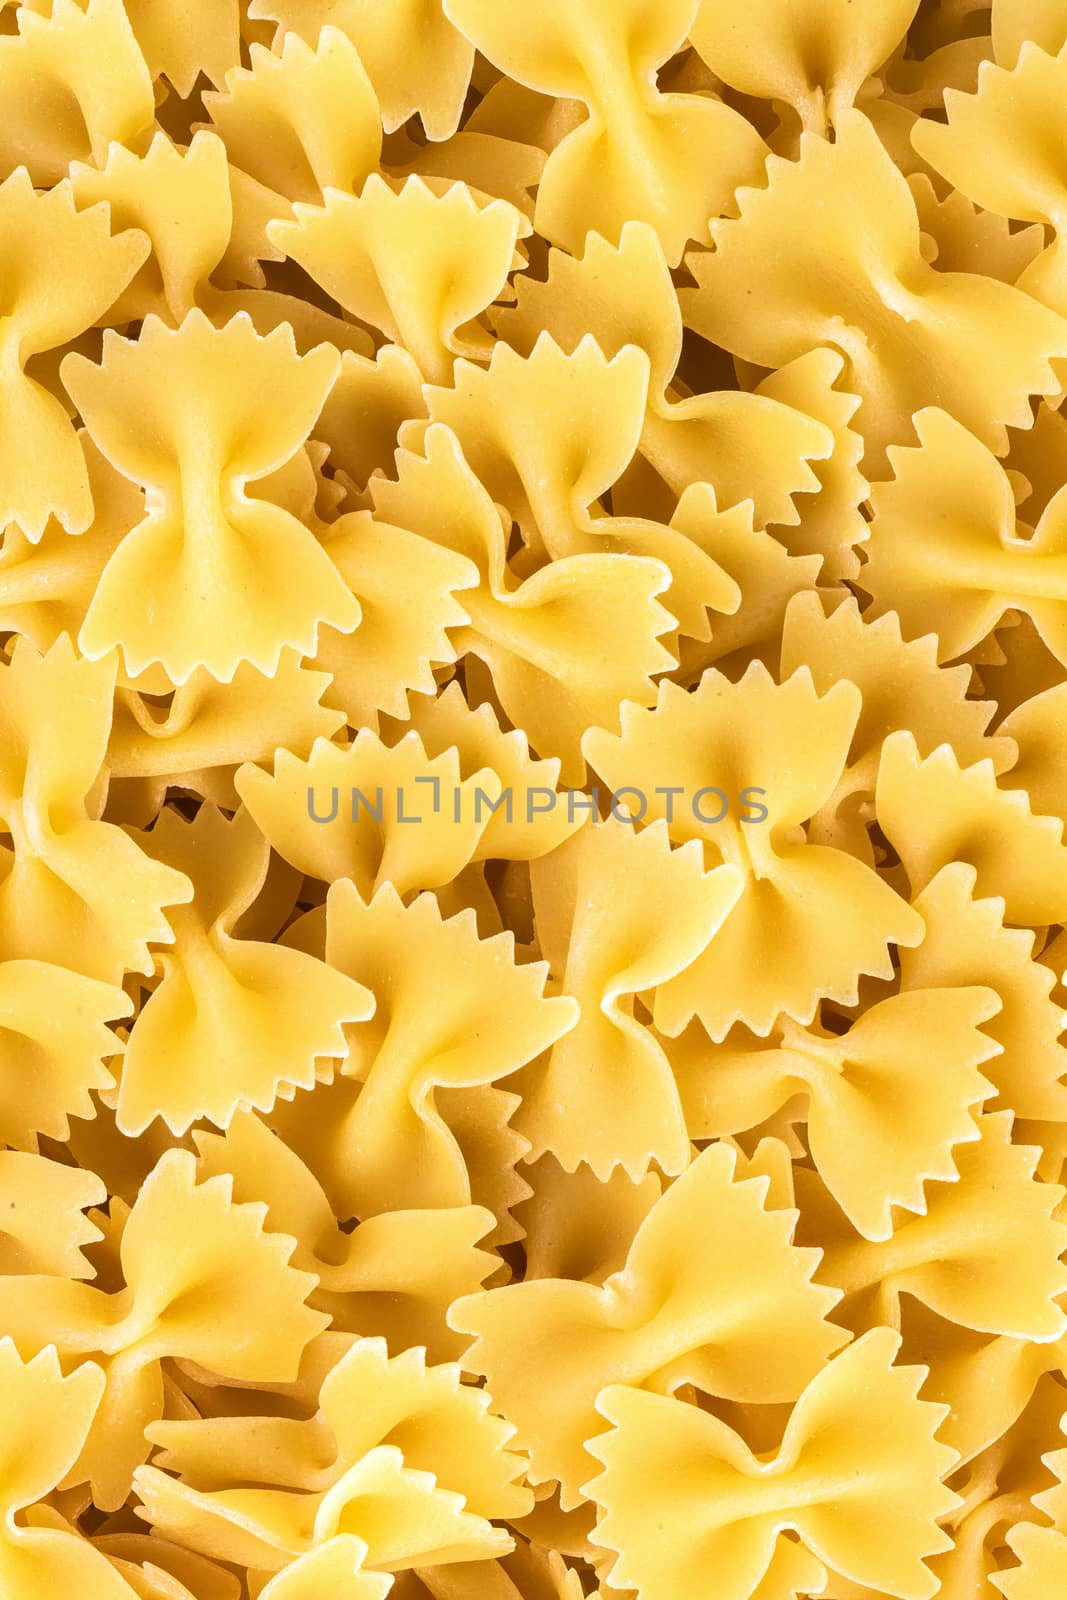 Famous variety of type and shape of Italian pasta. Dry pasta bows "farfalle". Heap of bow tie macaroni. The name of this pasta type is derived from the Italian word "farfalla" (butterfly).